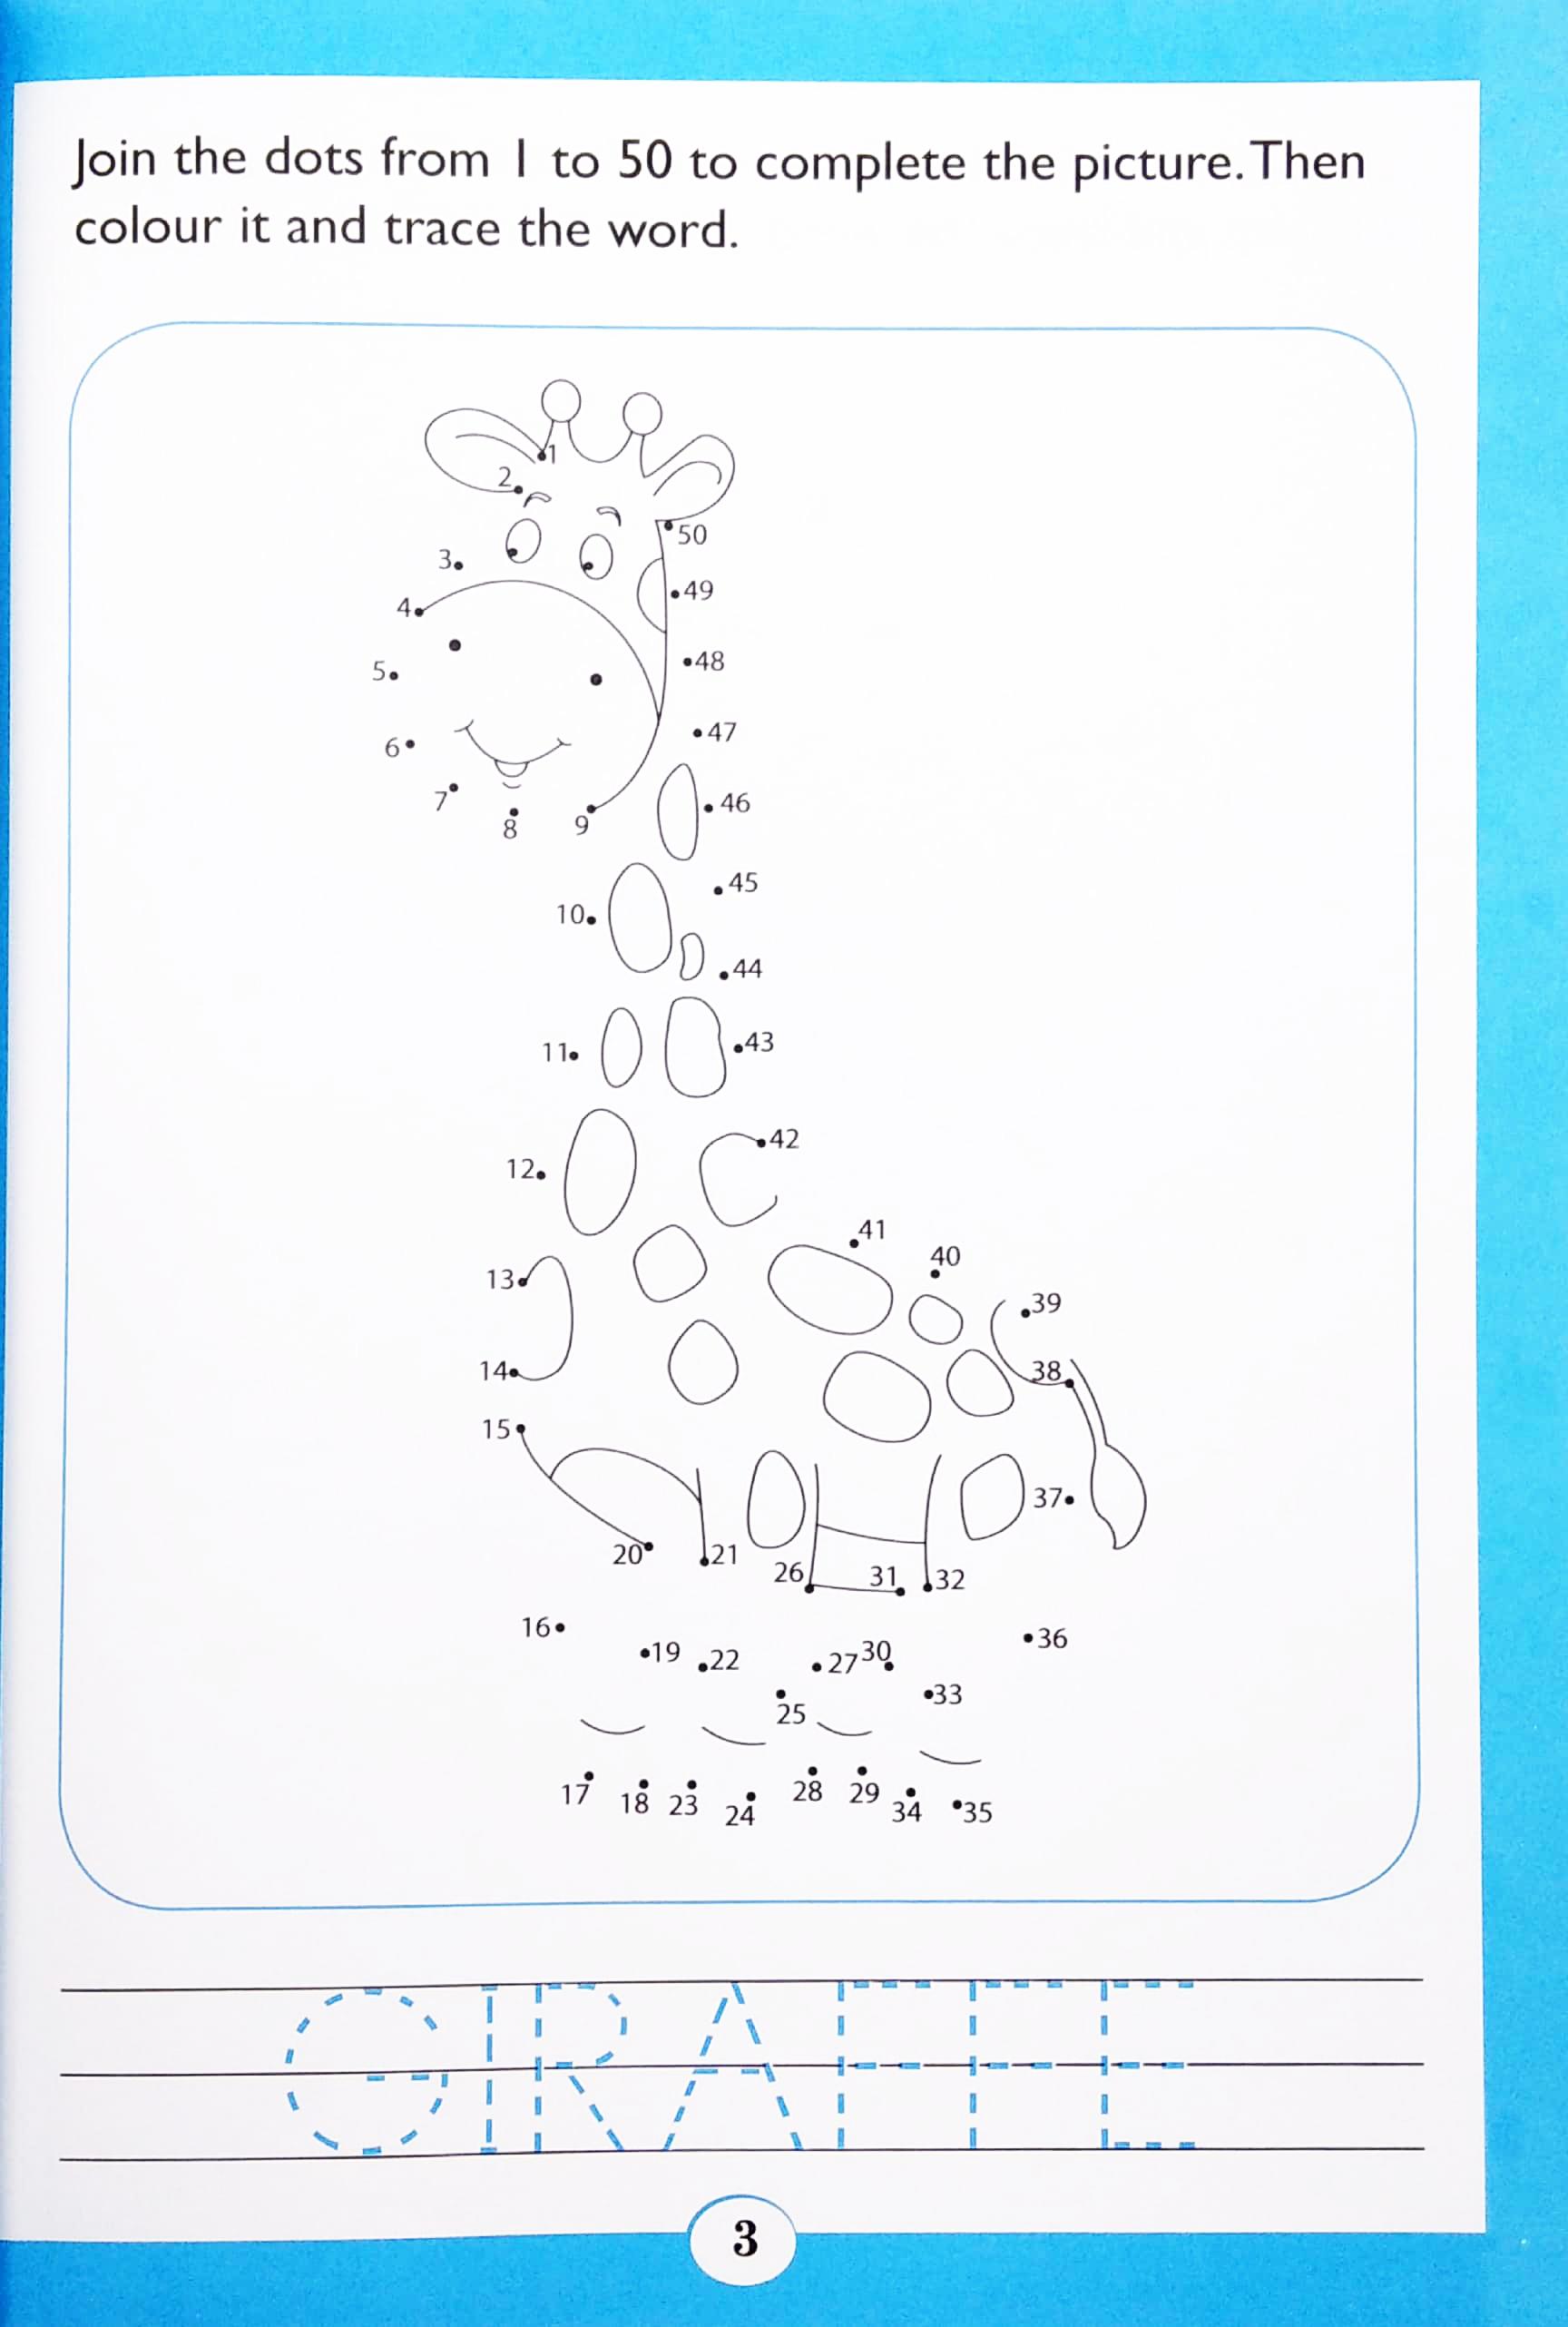 Dot -To- Dot Learning With Fun 1 To 50